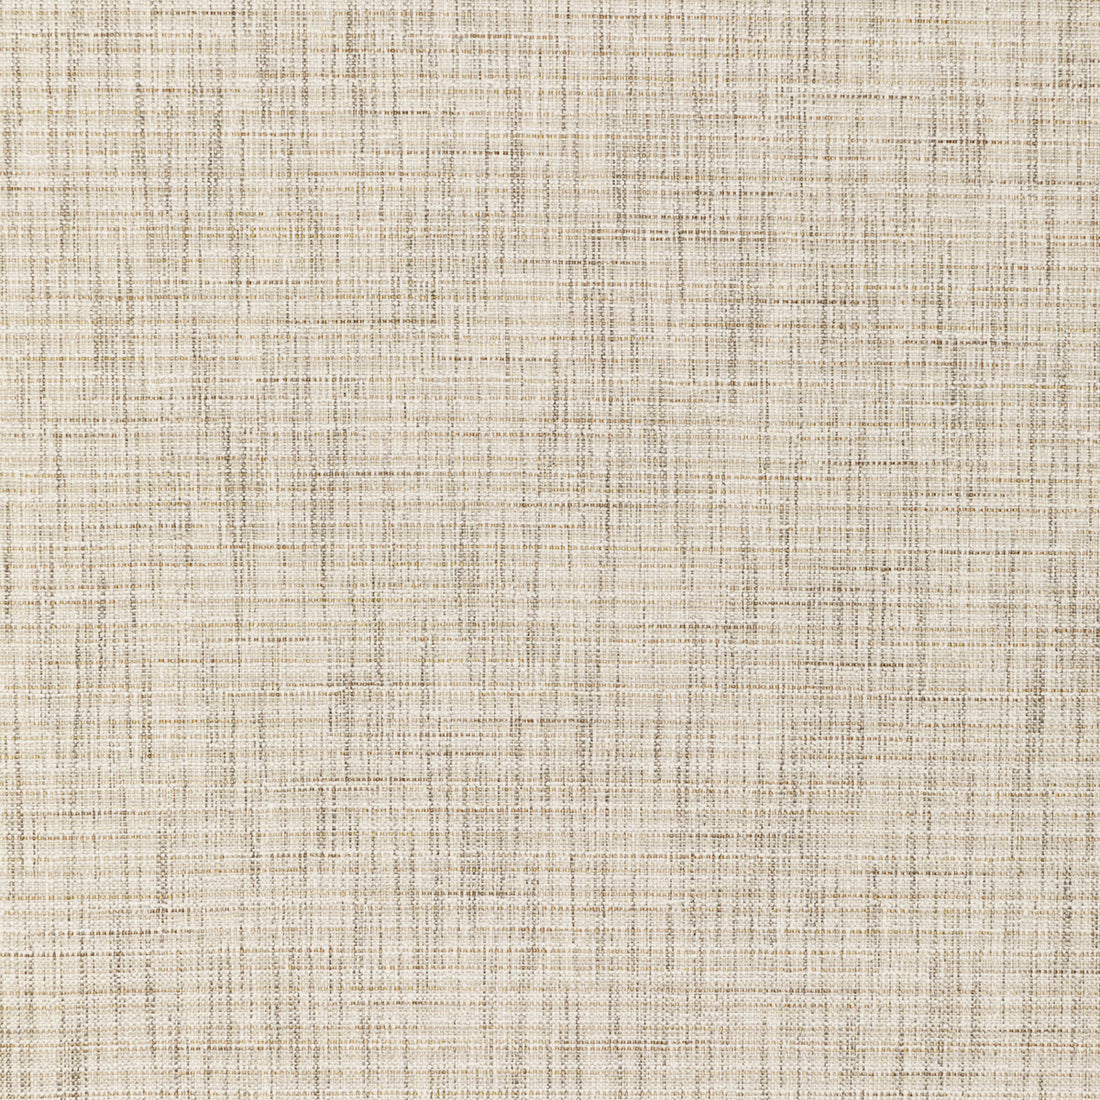 Kravet Smart fabric in 36289-1 color - pattern 36289.1.0 - by Kravet Smart in the Performance Crypton Home collection